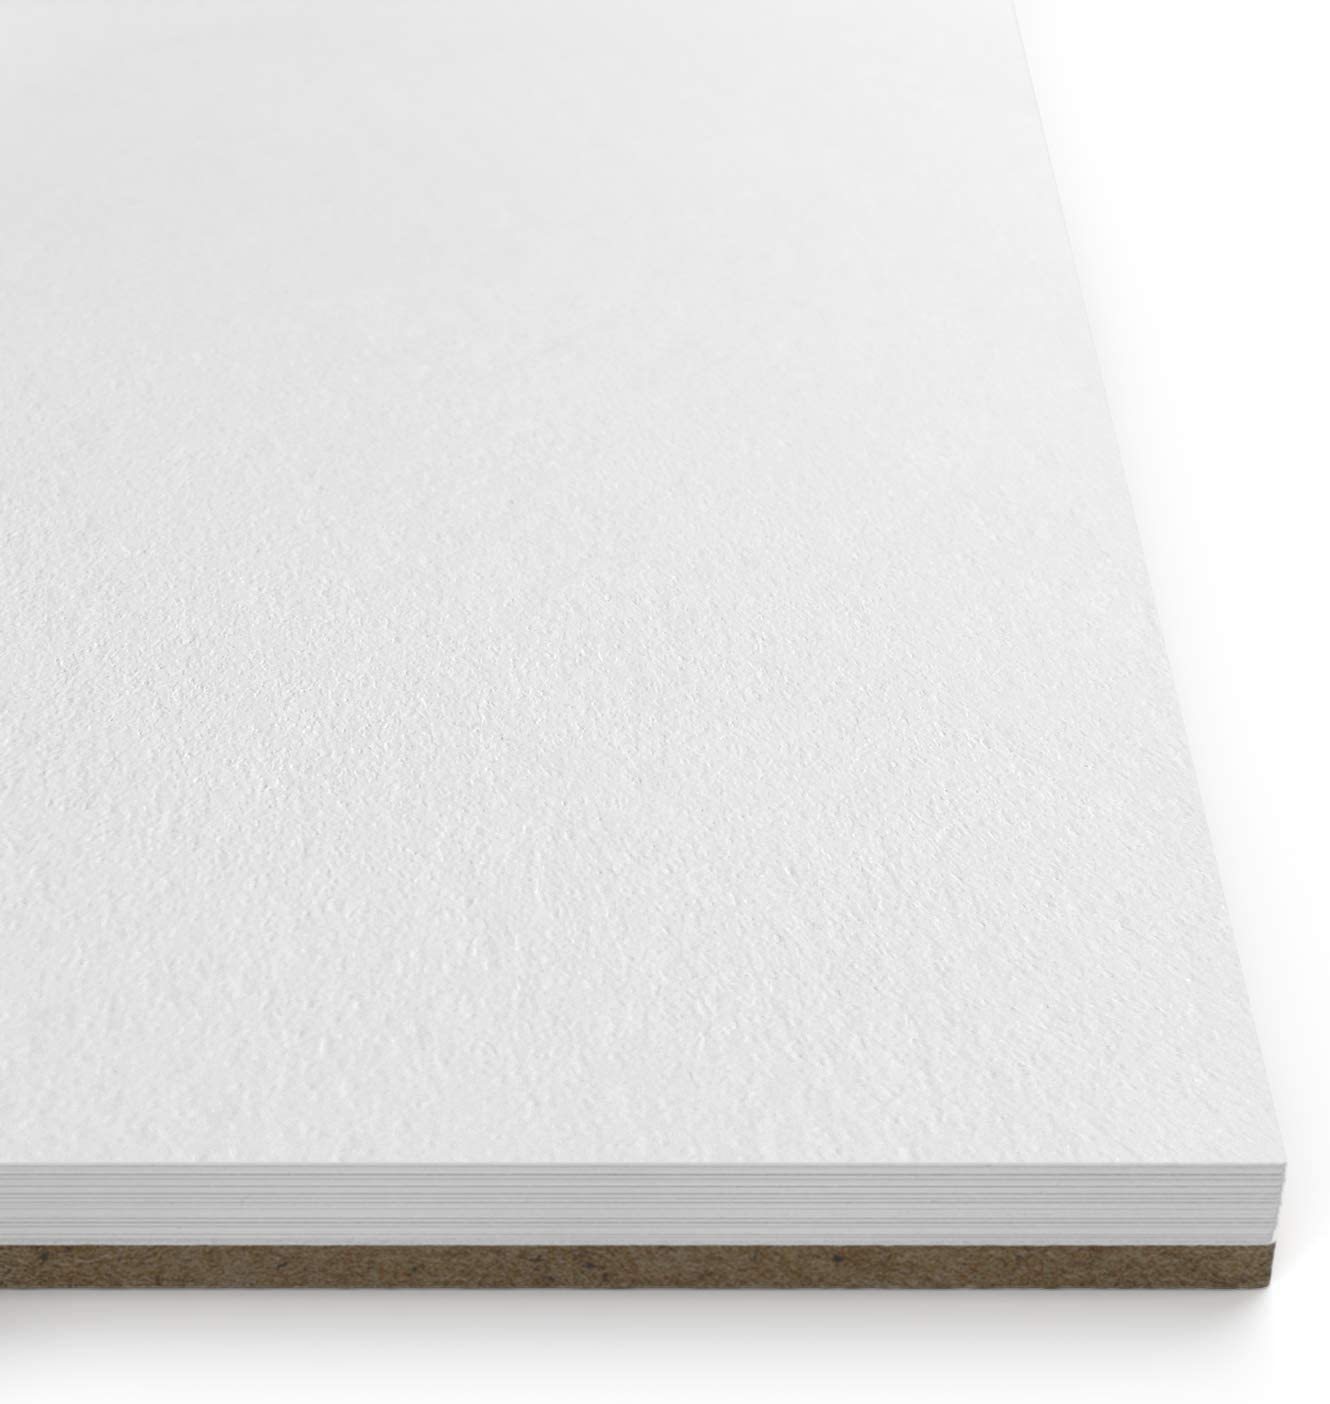 Art Street Doodle Pad, White, 9 inch x 12 inch, 80 Sheets, Size: 9 x 12, Other